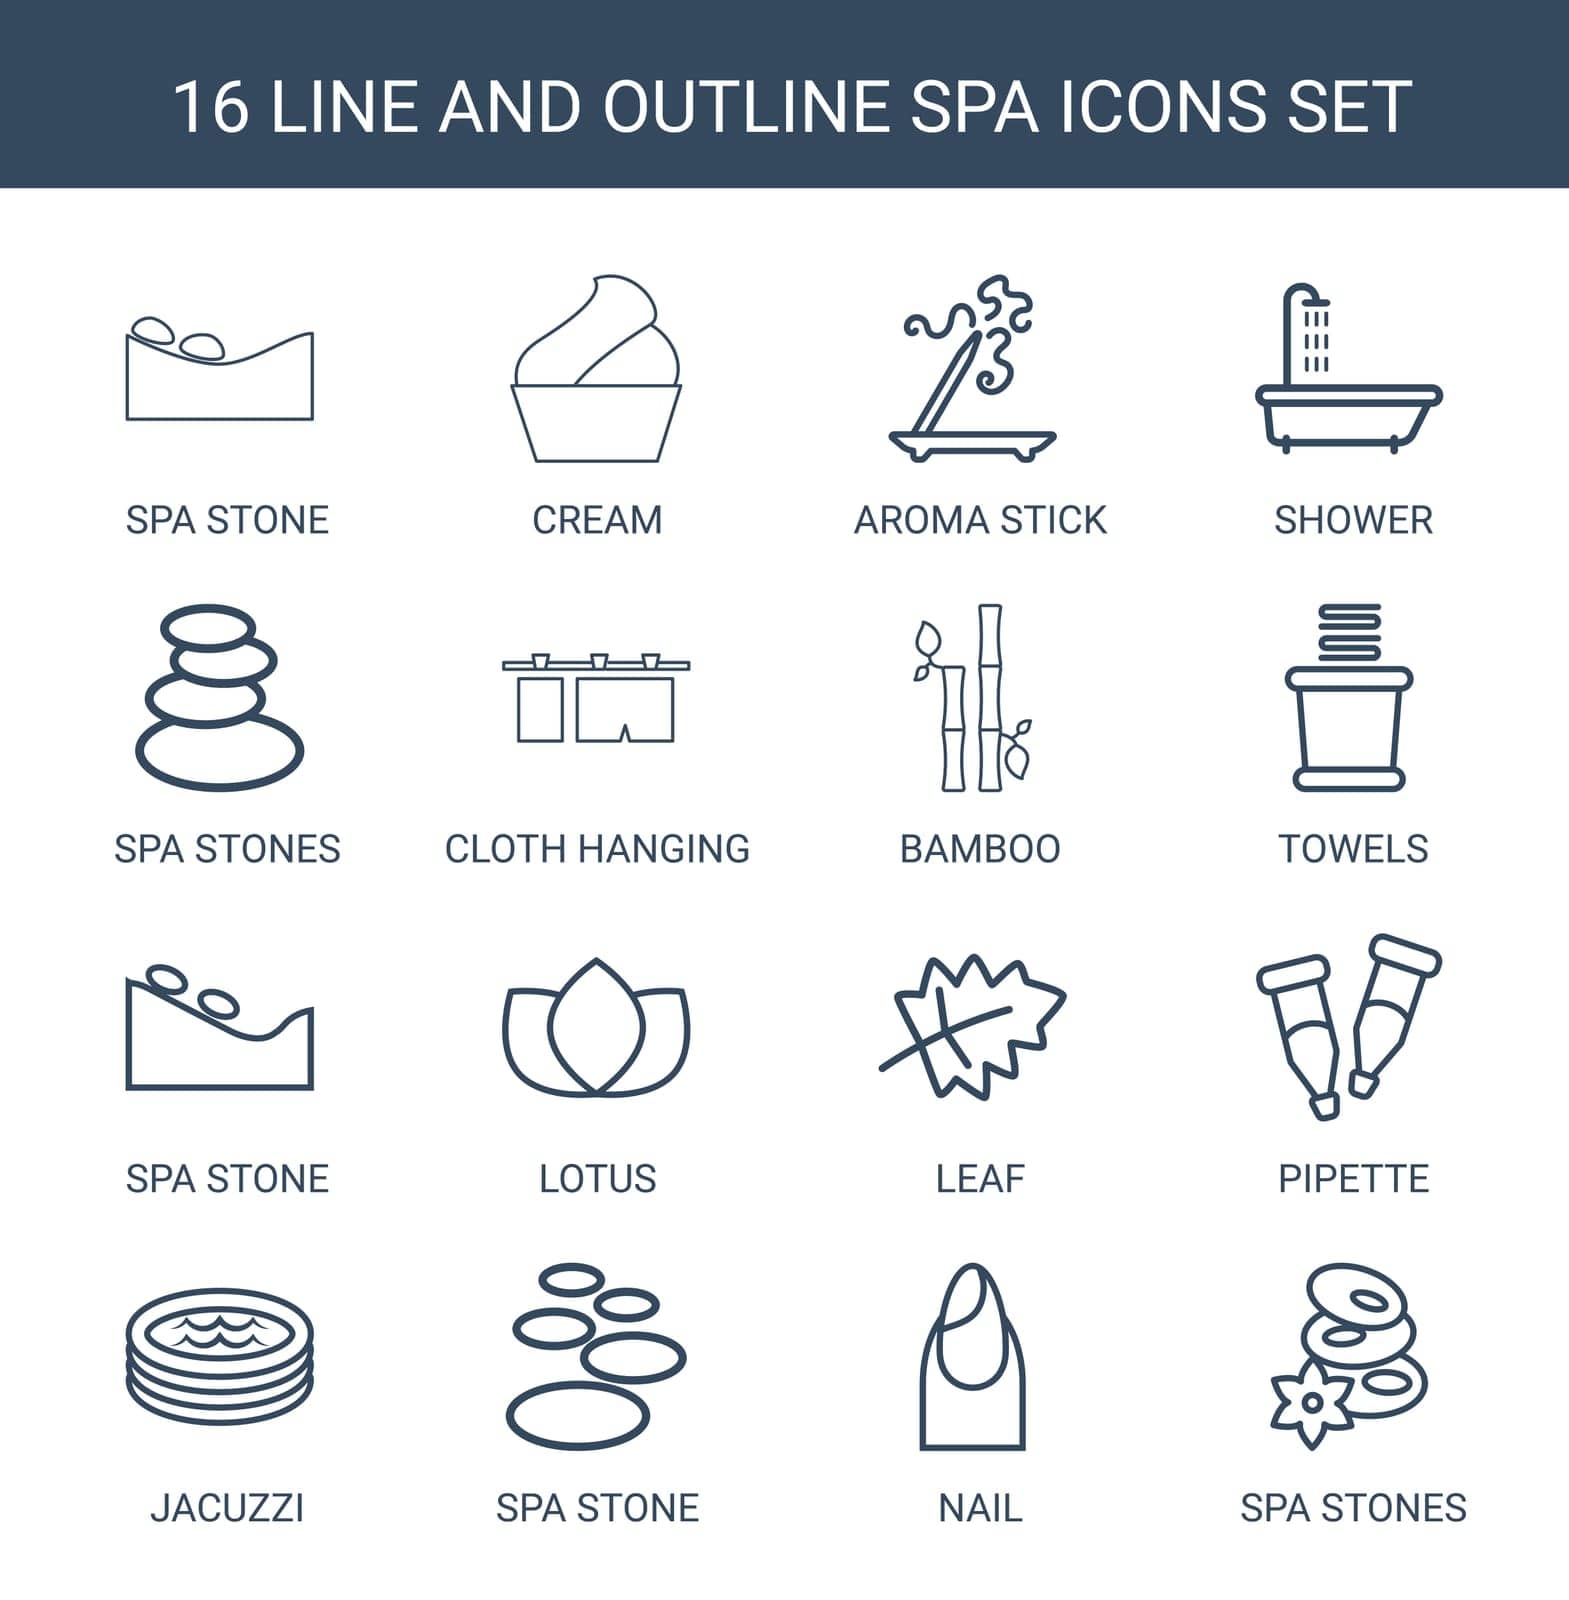 shower,symbol,beauty,concept,icon,sign,isolated,lotus,beautiful,white,towels,hygiene,design,stick,vector,graphic,bathroom,set,natural,jacuzzi,nature,spa,nail,relaxation,black,health,cream,abstract,leaf,clean,stone,bamboo,background,healthy,pipette,stones,illustration,hanging,aroma,care,cloth